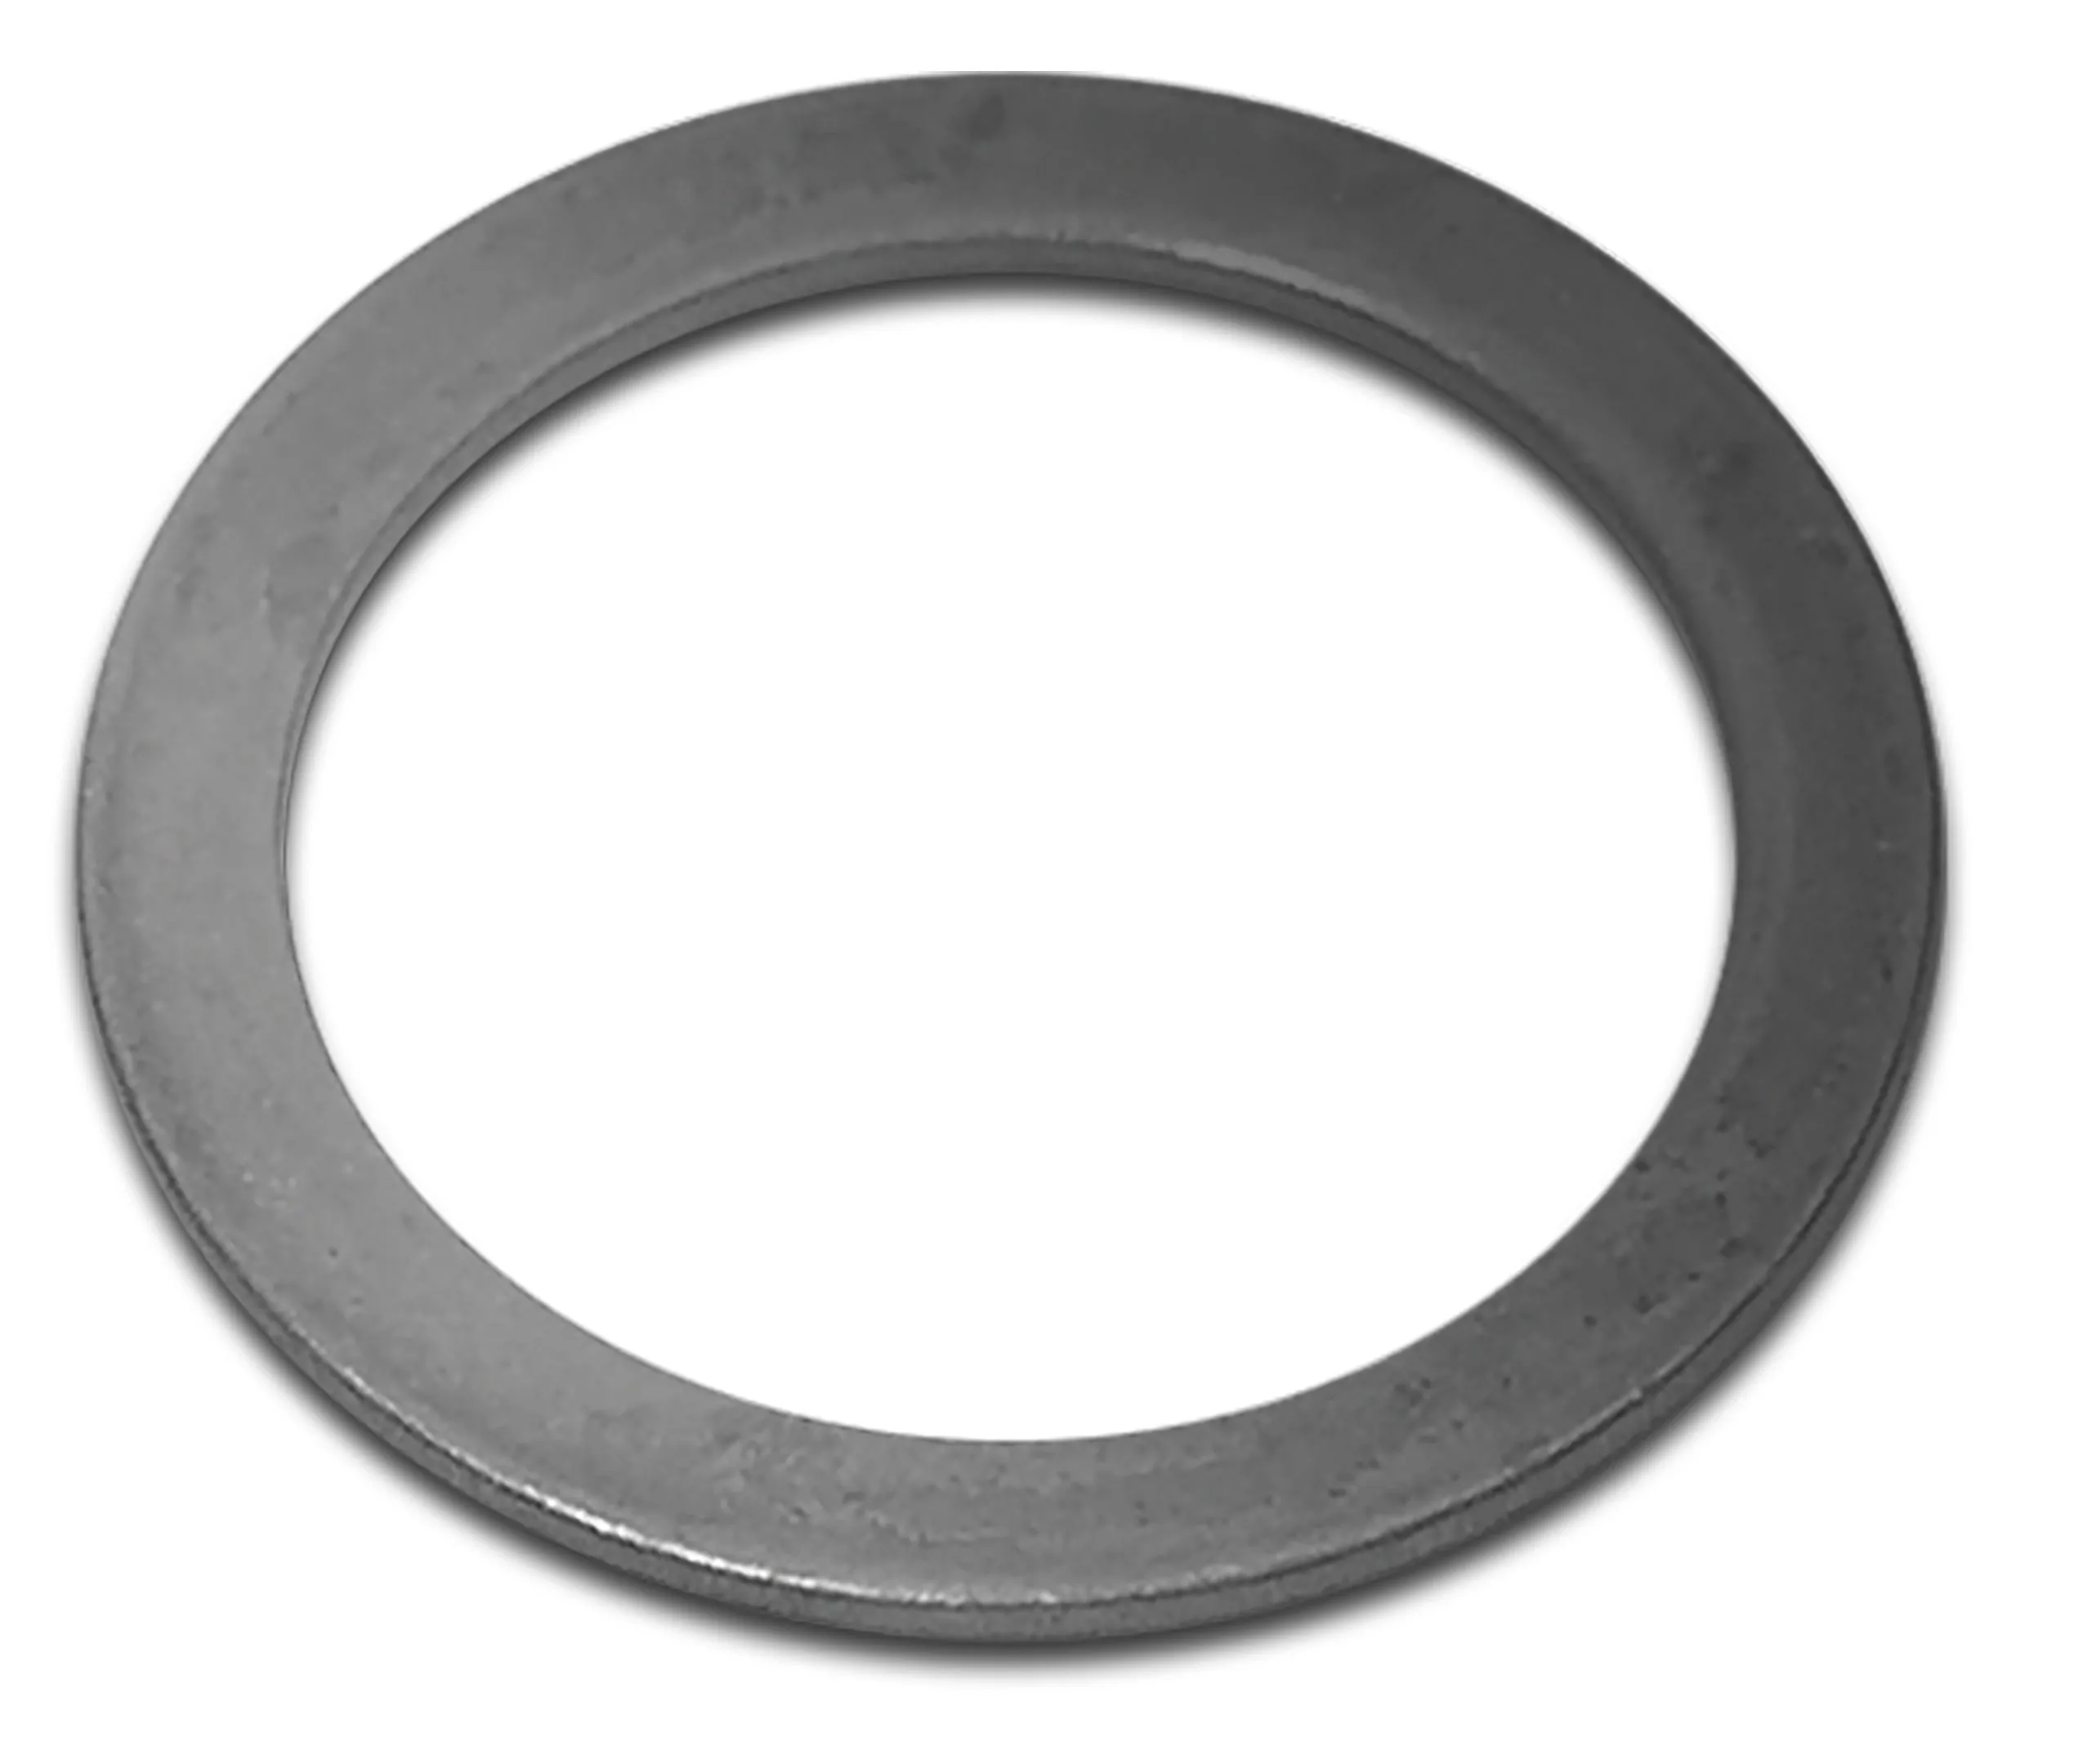 C2 1963-1966 Chevrolet Corvette Steering Column Lower Bearing Washer. - Auto Accessories of America